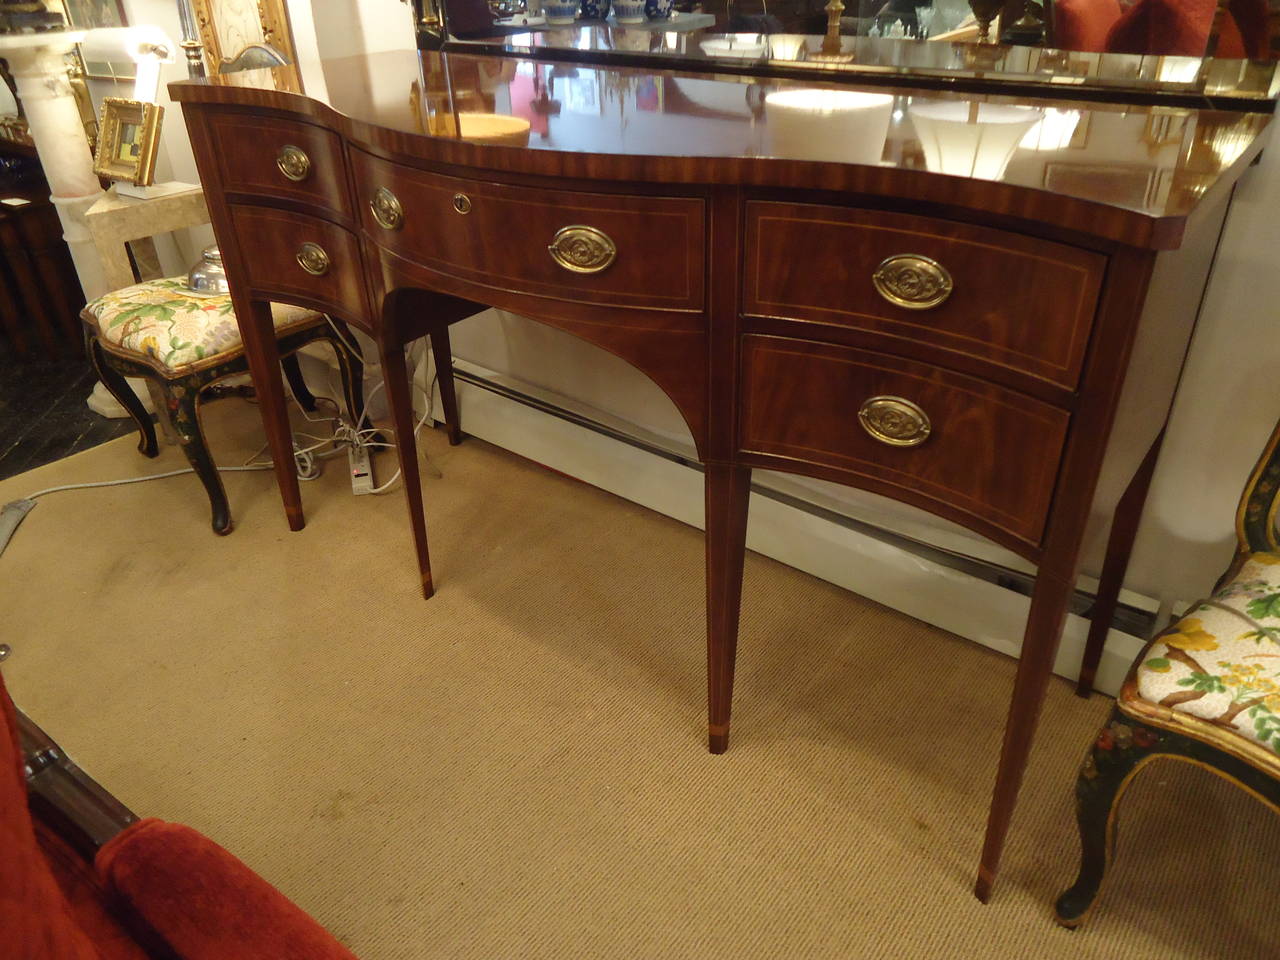 Mahogany sideboard with serpentine front and tapered legs modeled after an 18th century server in a private Charleston house. Top of the line Baker piece from their 